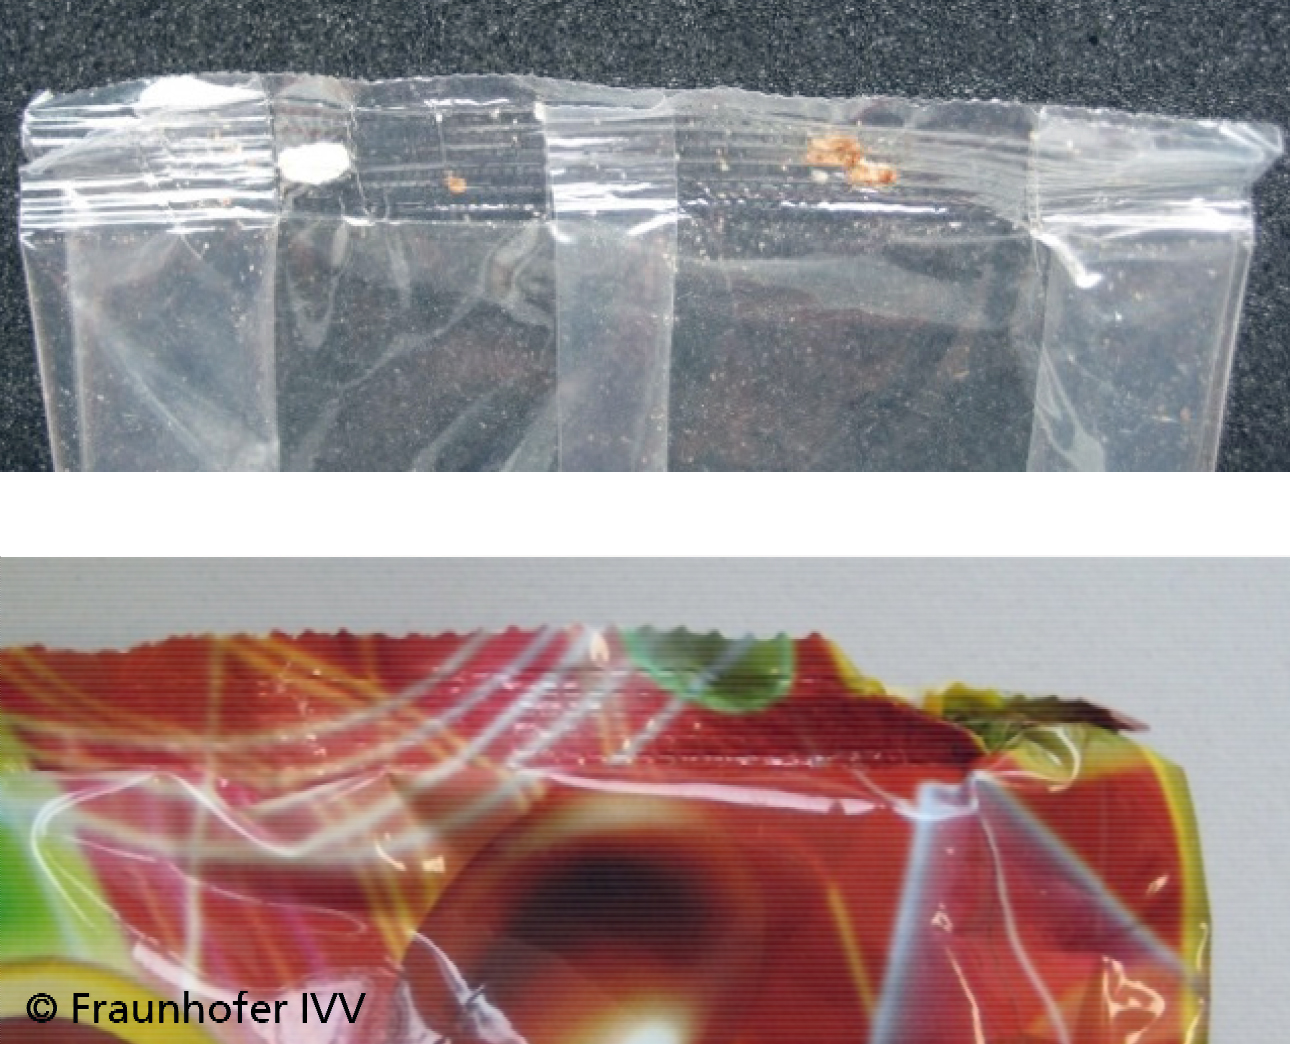 Examples of leaking or visually deficient film packaging: contamination via packaged goods in the sealed seam (above) and folds in the weld seam (below). 